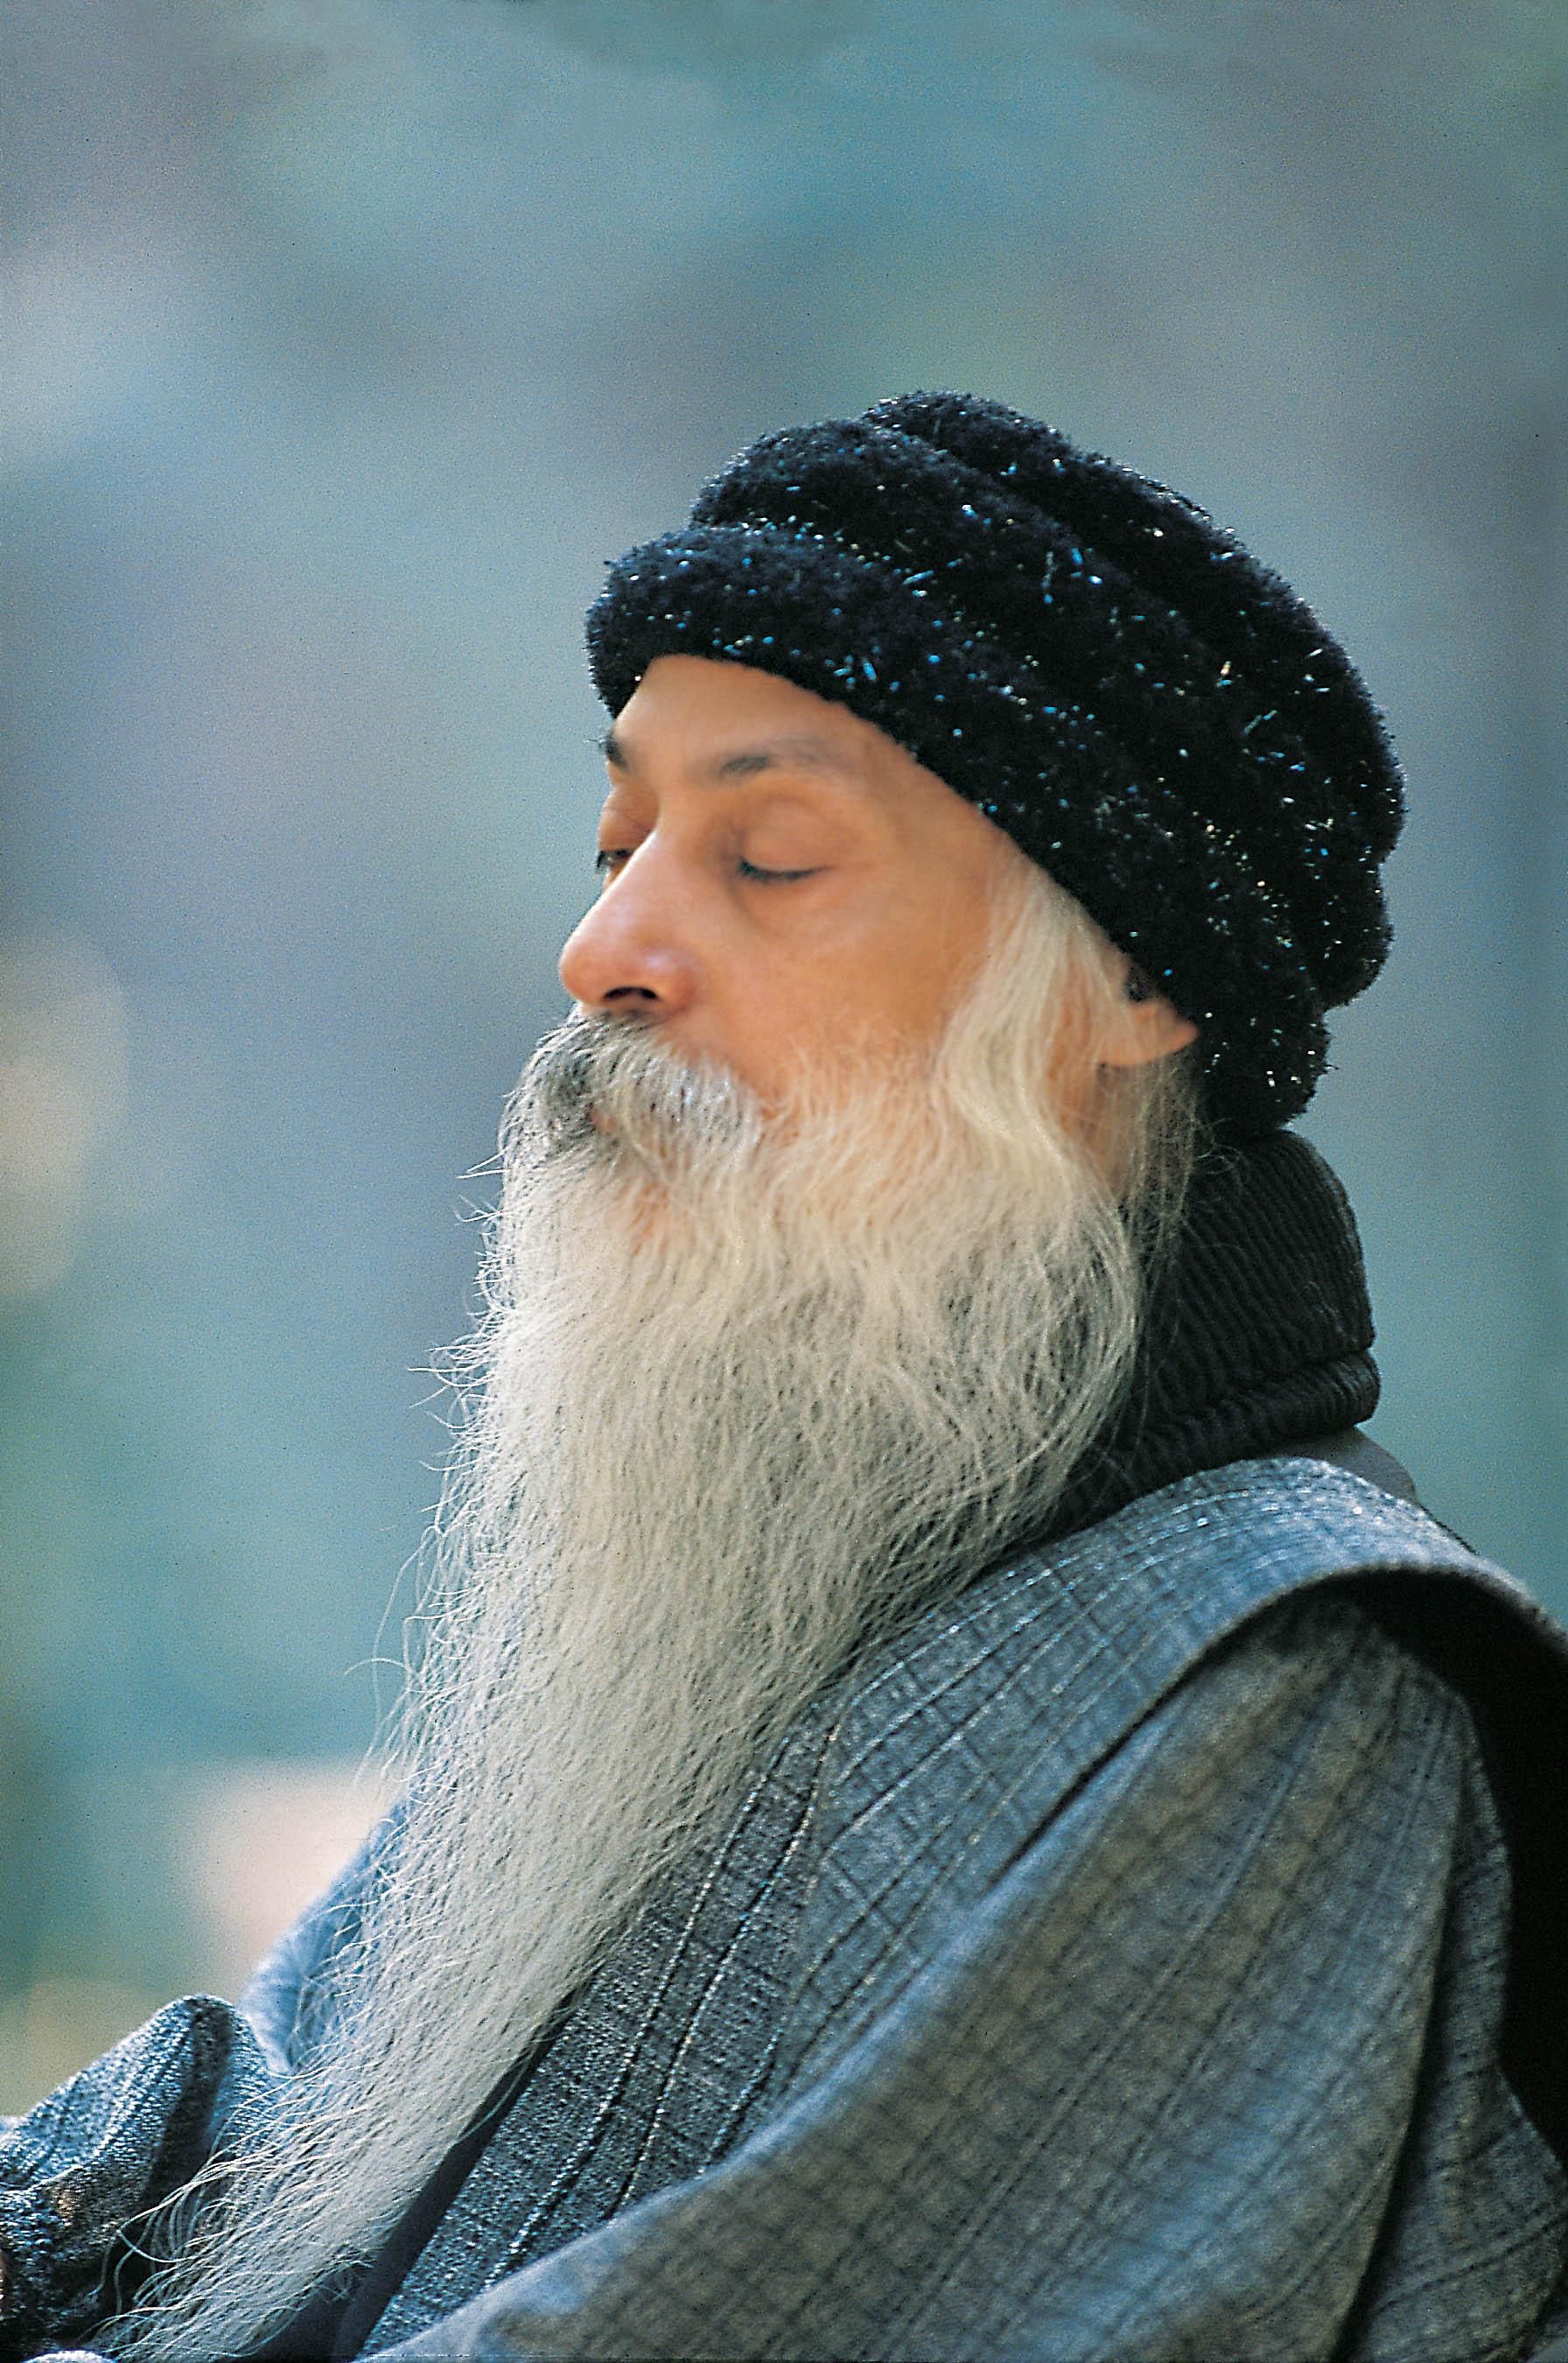 Osho Wallpapers - Wallpaper Cave